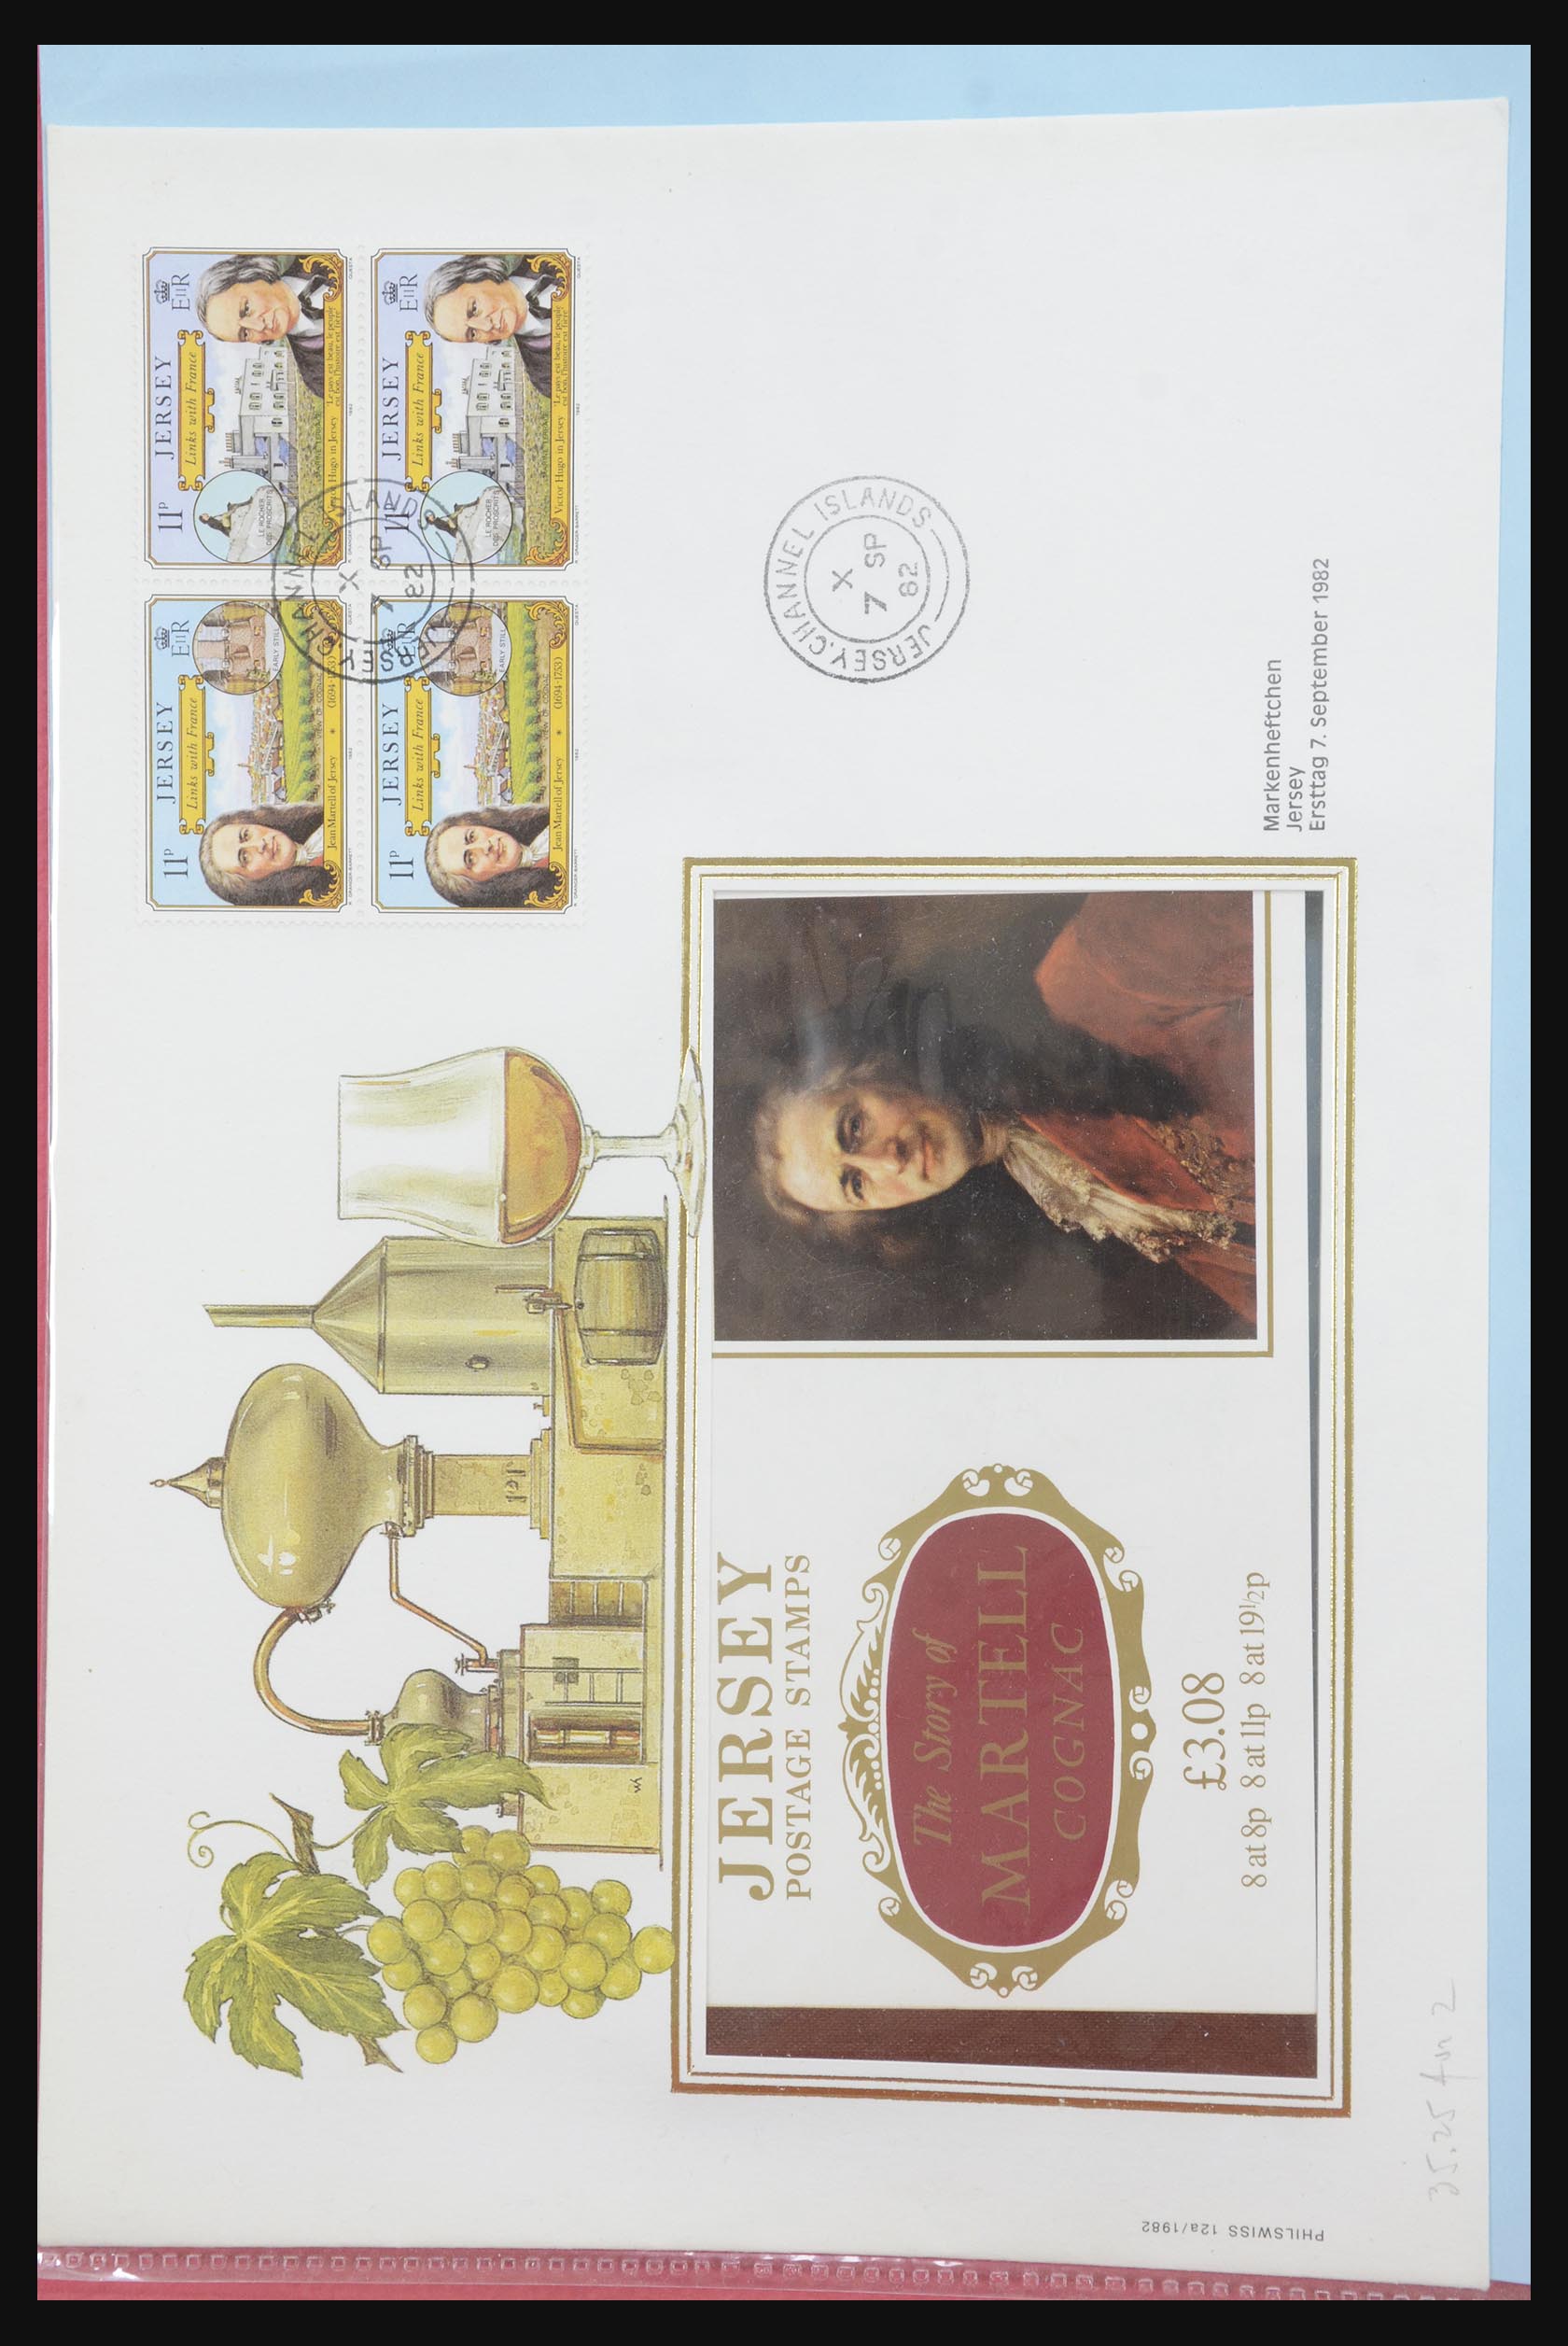 31915 079 - 31915 Western Europe souvenir sheets and stamp booklets on FDC.